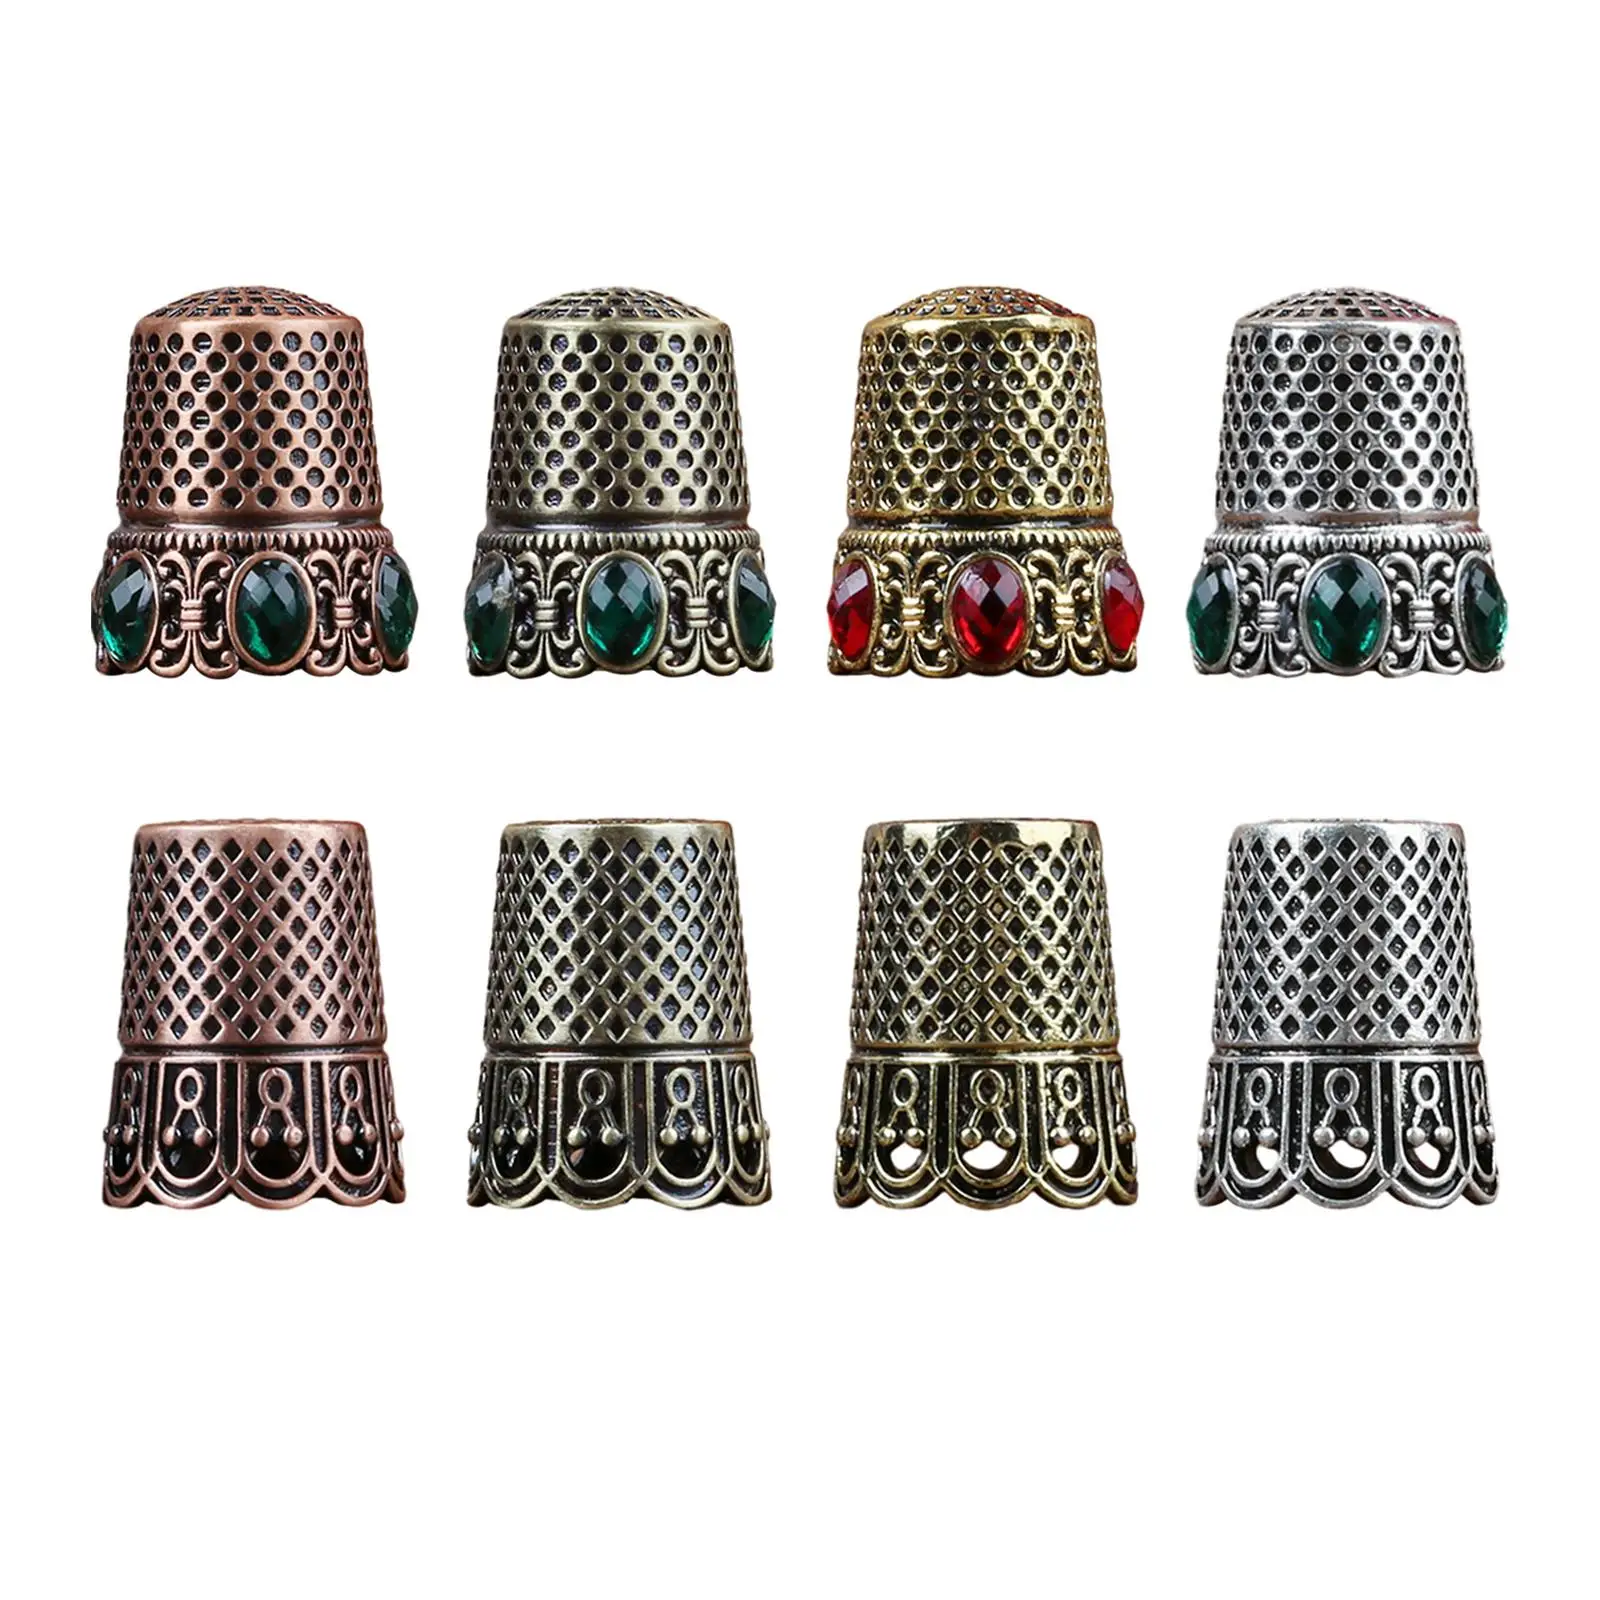 Sewing Thimble Finger Protector Antique Metal Thimble Finger Guards for Sewing Embroidery Needlework Craft Quilting Accessories